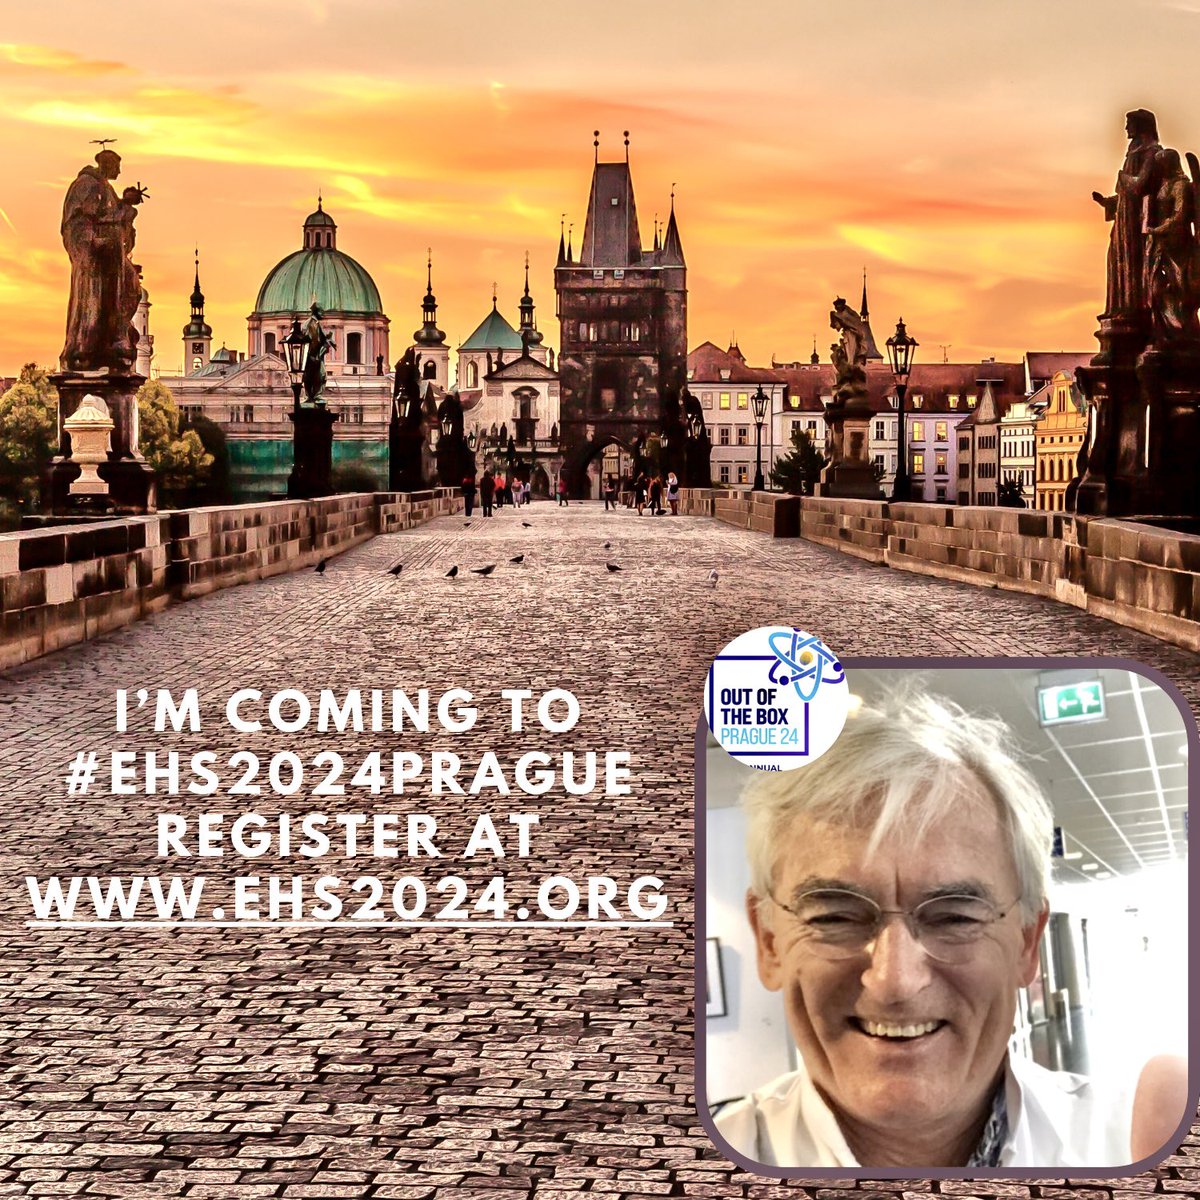 The beautiful astronomical clock is ticking! @EHSprague2024 @eurohernias starts in 2,5 million seconds or just 40,000 minutes! I’ll be debating @ManuelLpezCano1 on the value of open pre-peritoneal inguinal hernia repair. Will be fun.